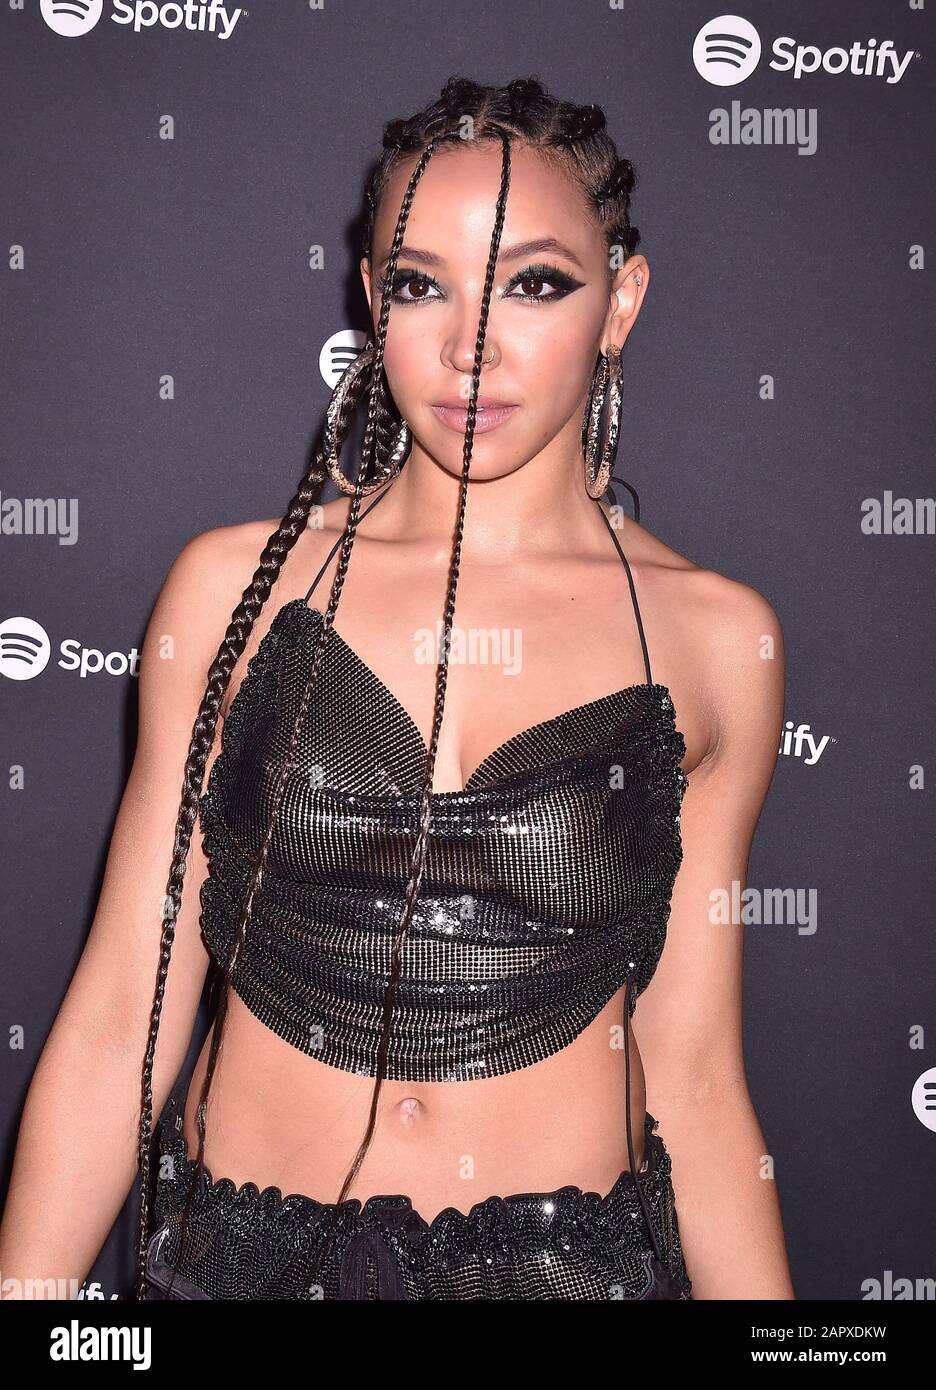 WEST HOLLYWOOD, CA - JANUARY 23: Tinashe attends at the Spotify Best New Artist 2020 Party at The Lot Studios on January 23, 2020 in Los Angeles, California. Stock Photo